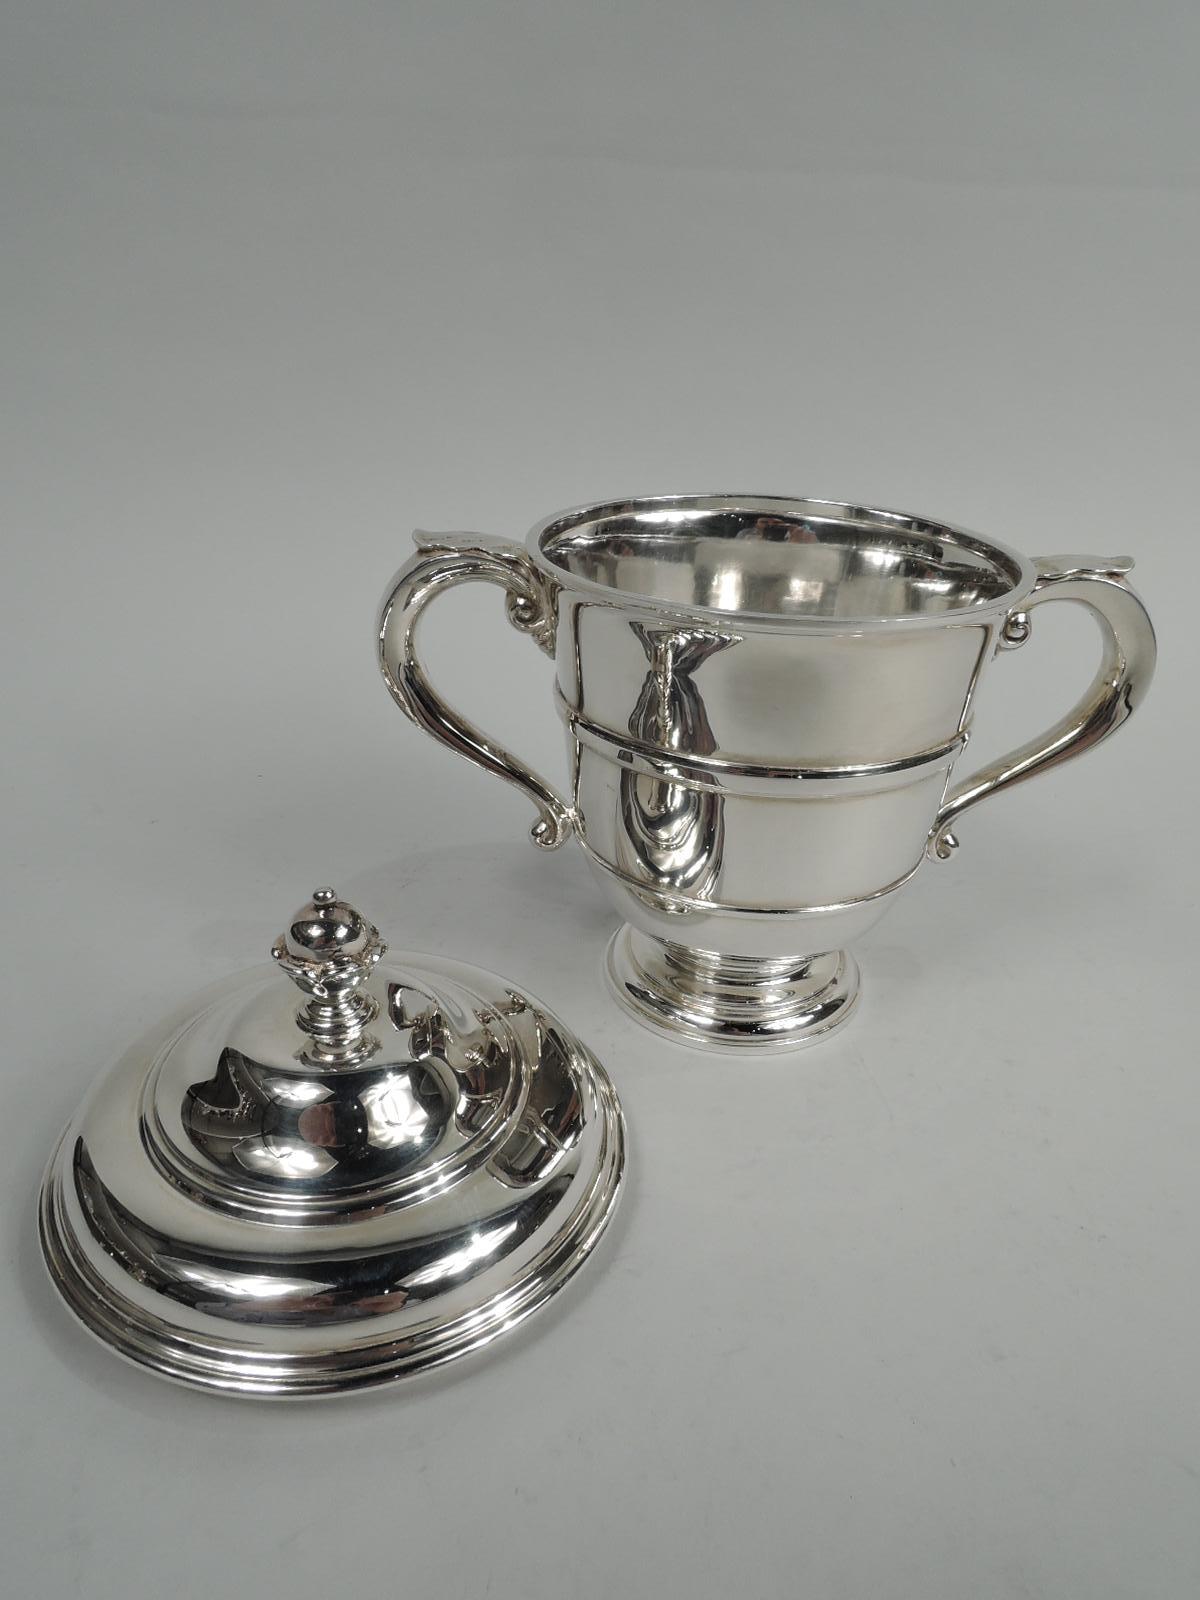 George V sterling silver trophy cup. Made by Charles & Richard Comyns in London in 1923. Girdled urn, round and stepped foot, and leaf-capped scroll handles. Cover double domed with bud finial. The classic winning form in small scale. Fully marked.